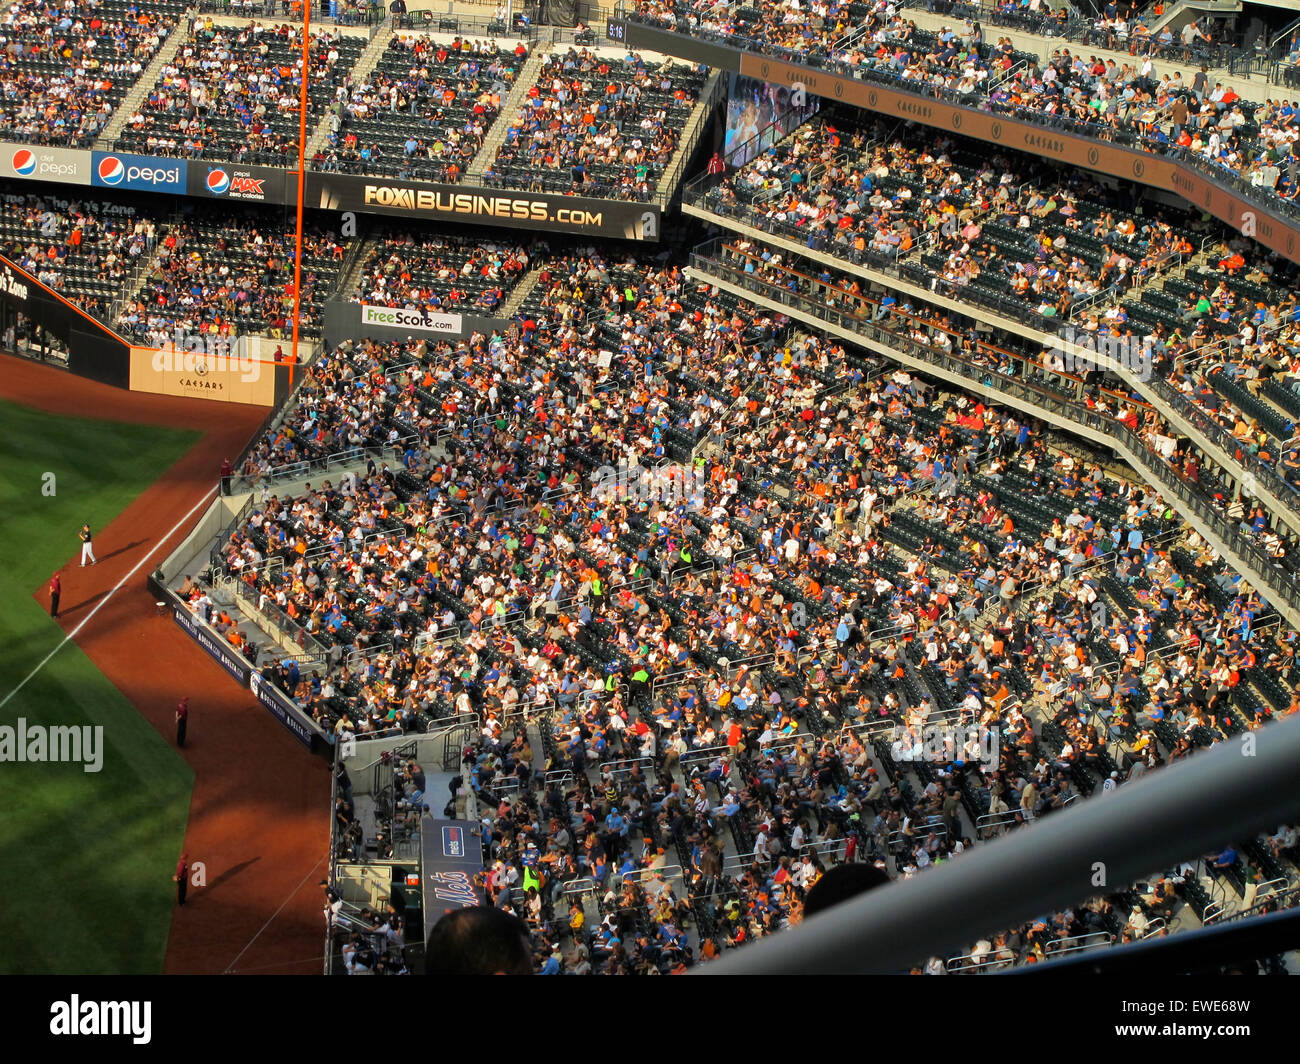 Large crowd of people at Citi Field during a Mets game in Queens, NY. Stock Photo